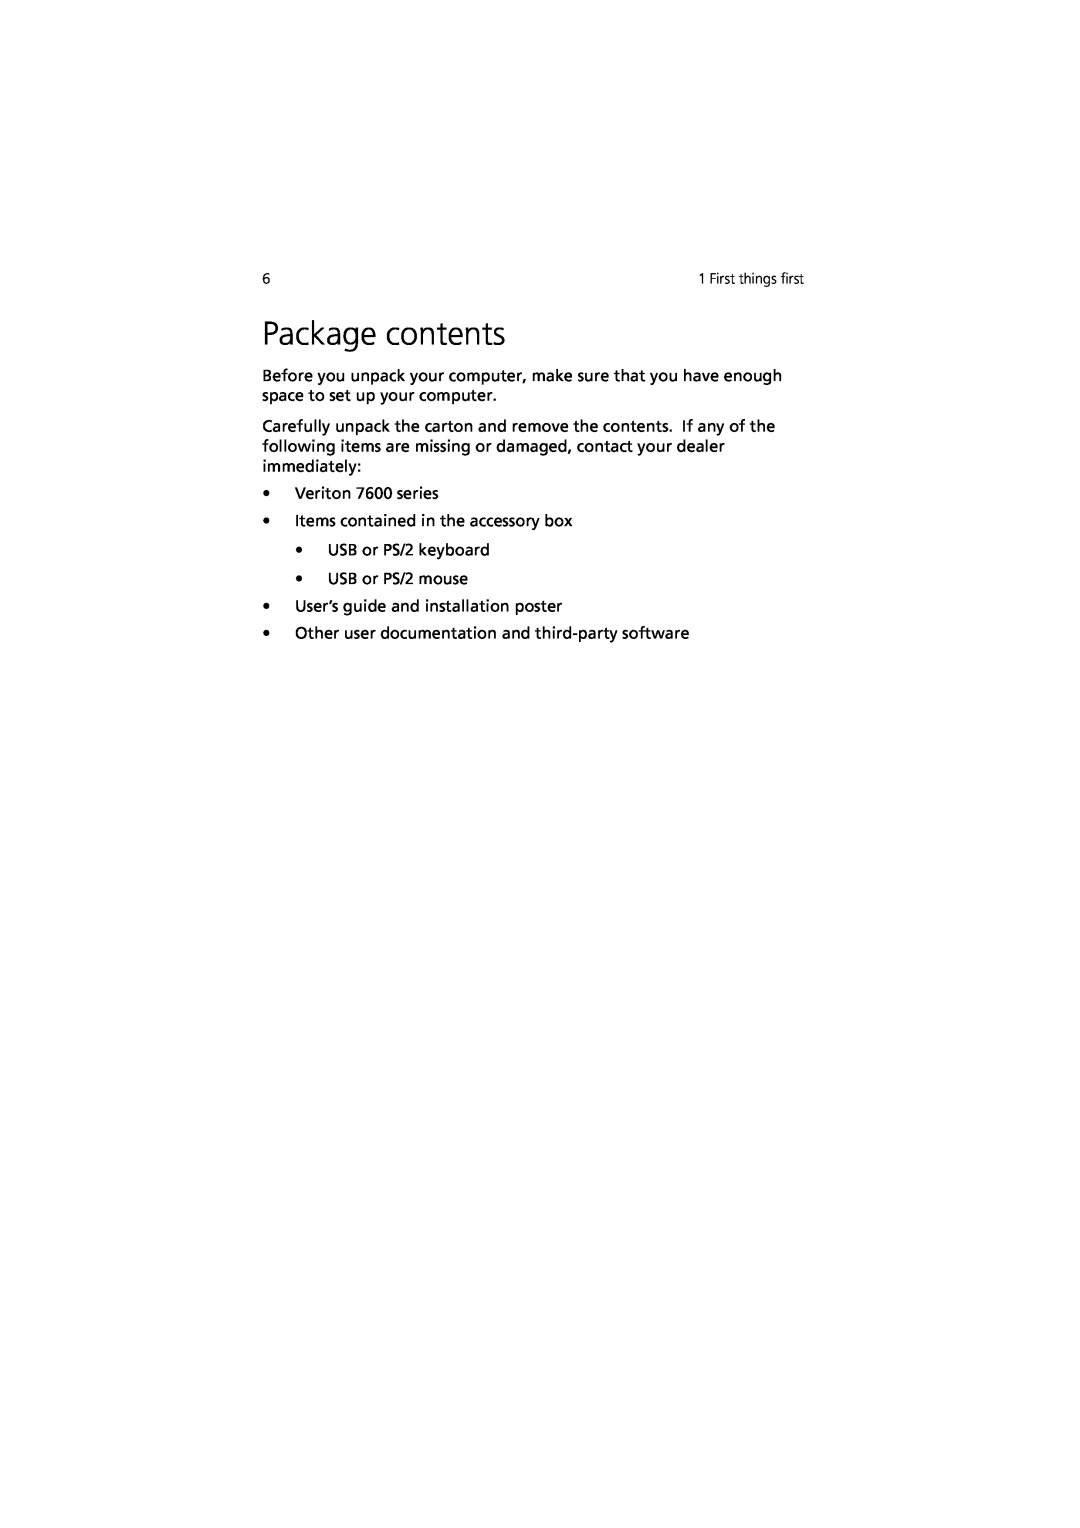 Acer 7600 manual Package contents 